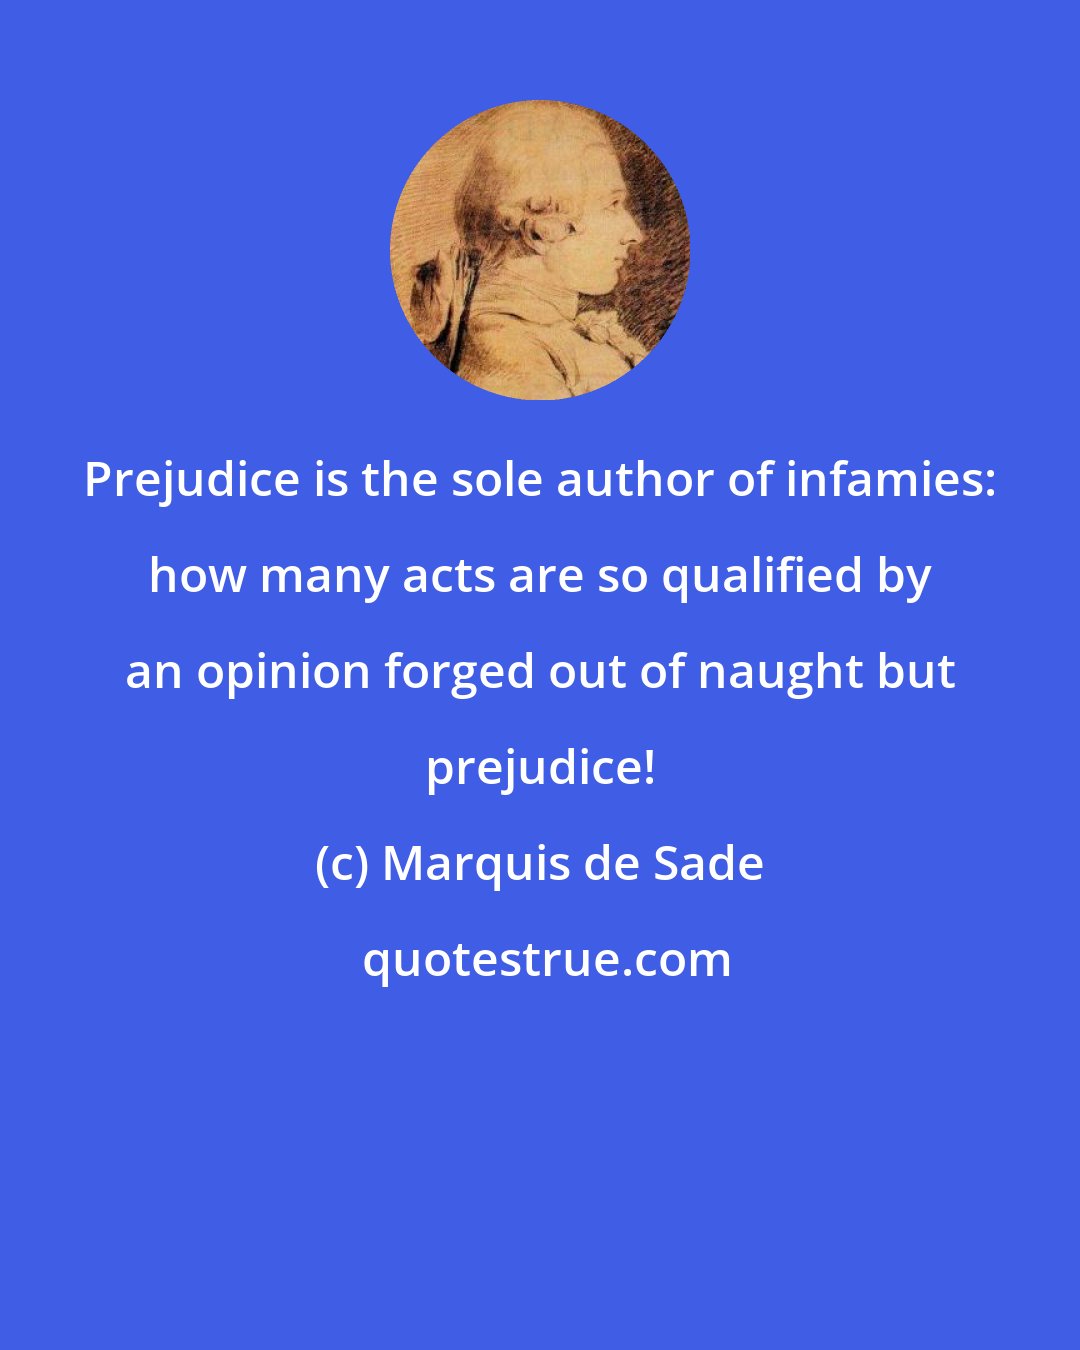 Marquis de Sade: Prejudice is the sole author of infamies: how many acts are so qualified by an opinion forged out of naught but prejudice!